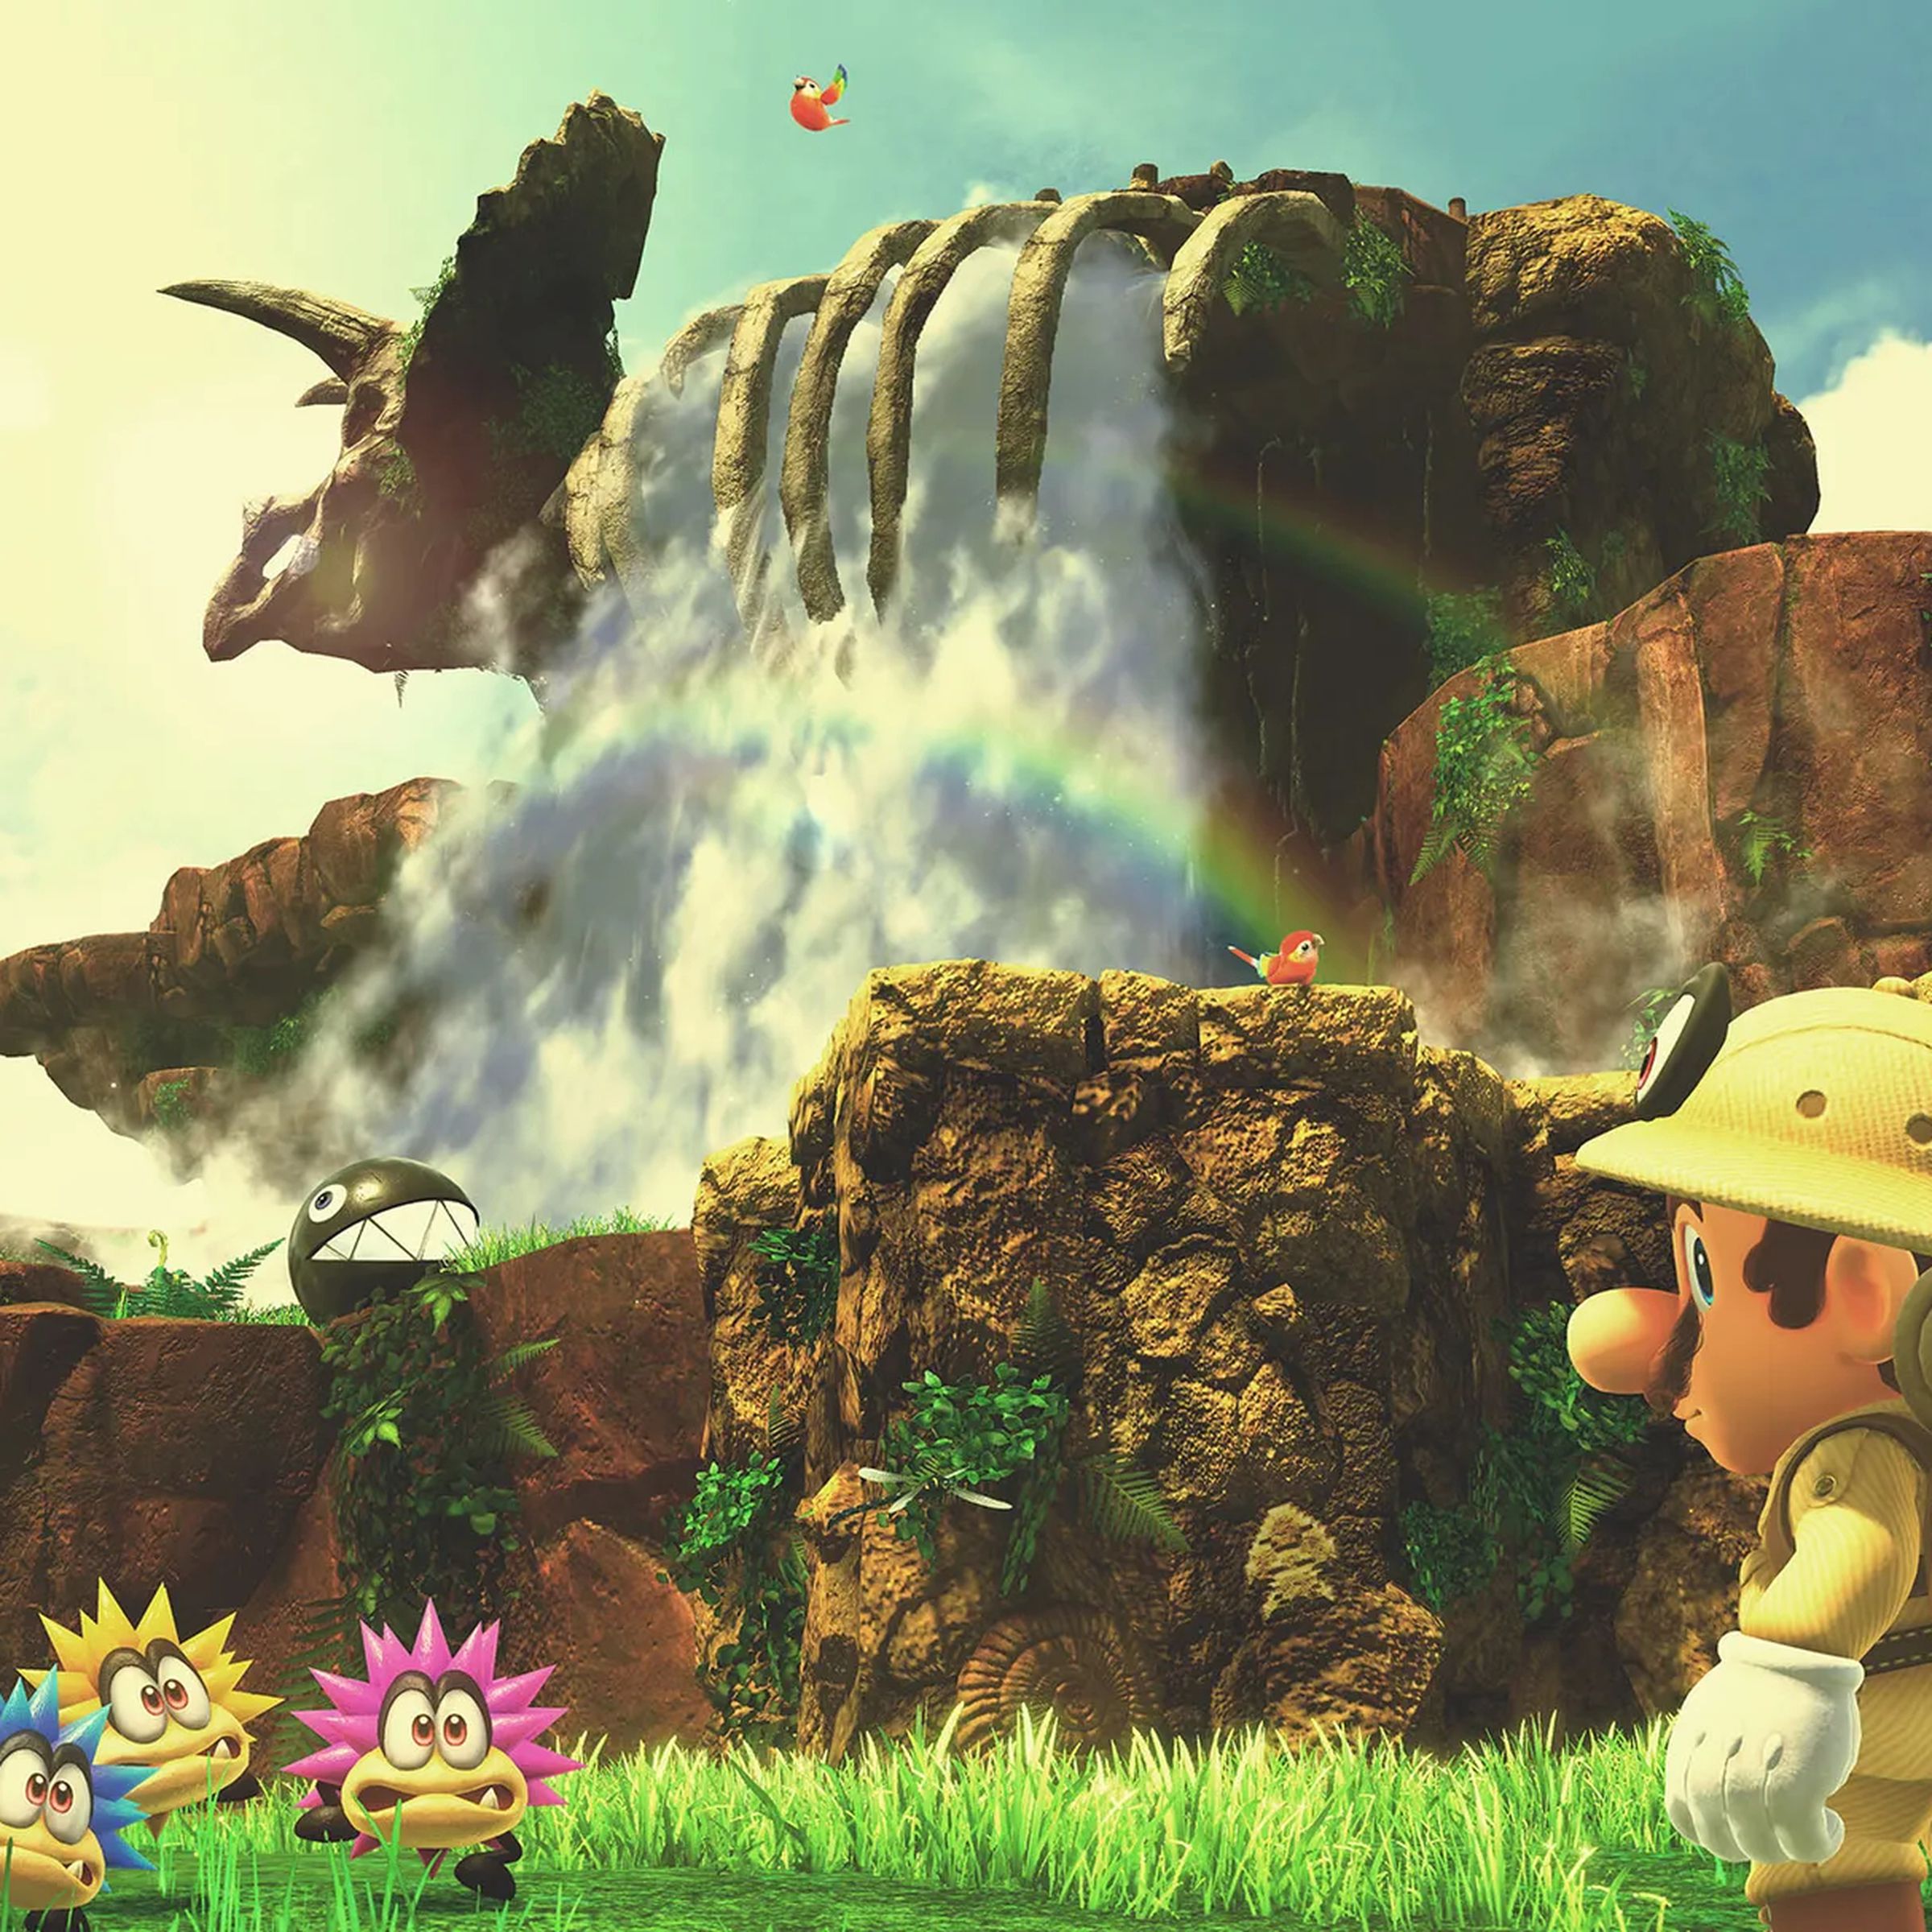 An image of Mario standing in front of dinosaur bones and a waterfall wearing attire for a safari.